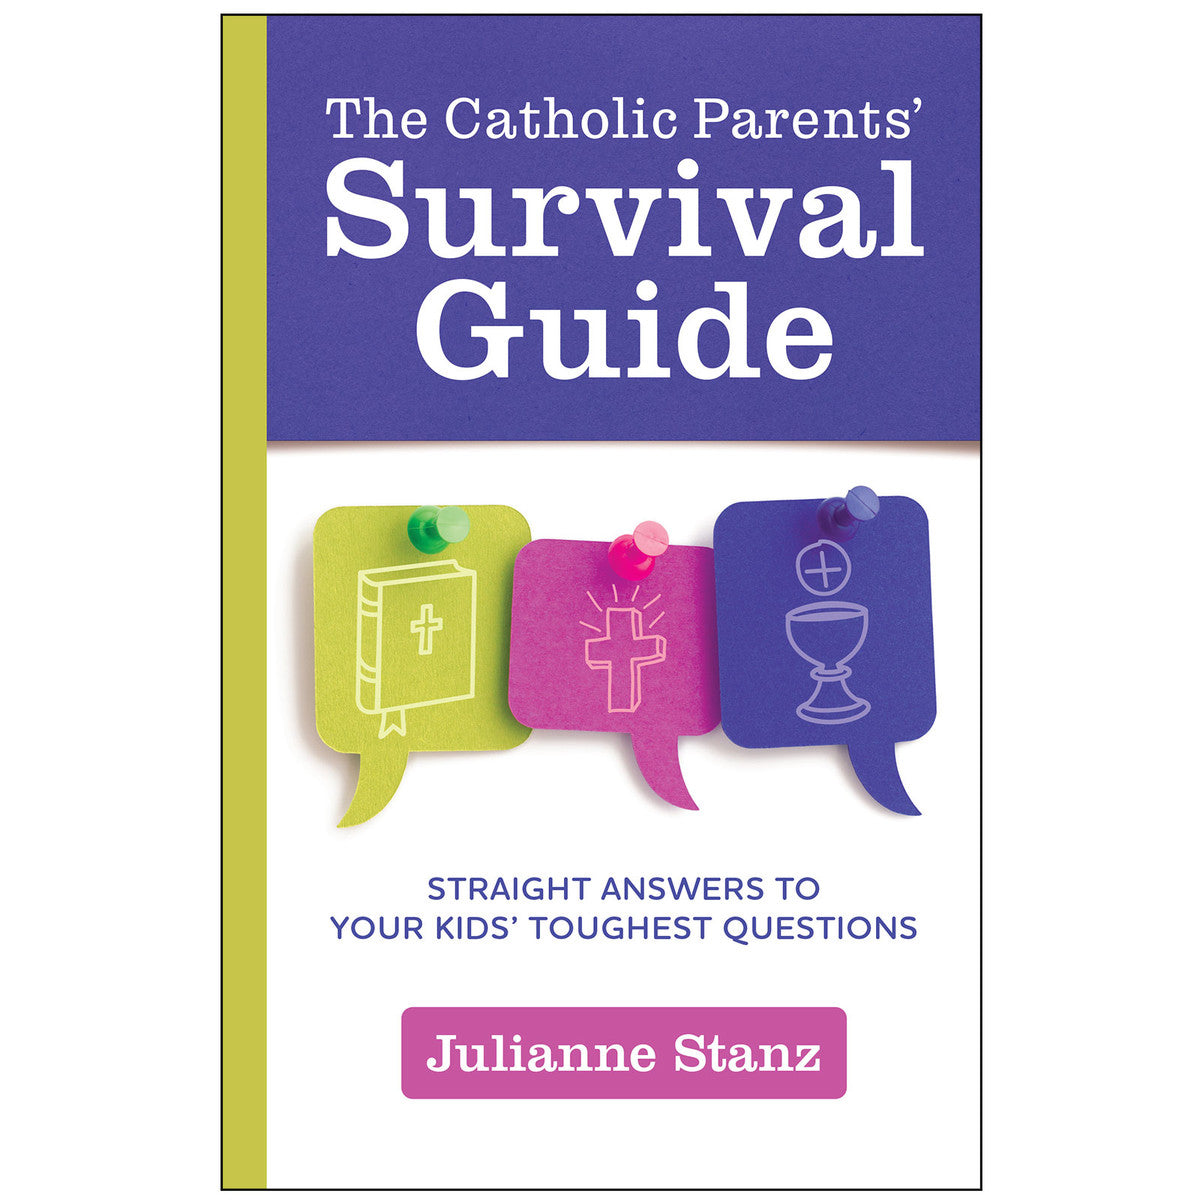 The Catholic Parents' Survival Guide Straight Answers to Your Kids' Toughest Questions